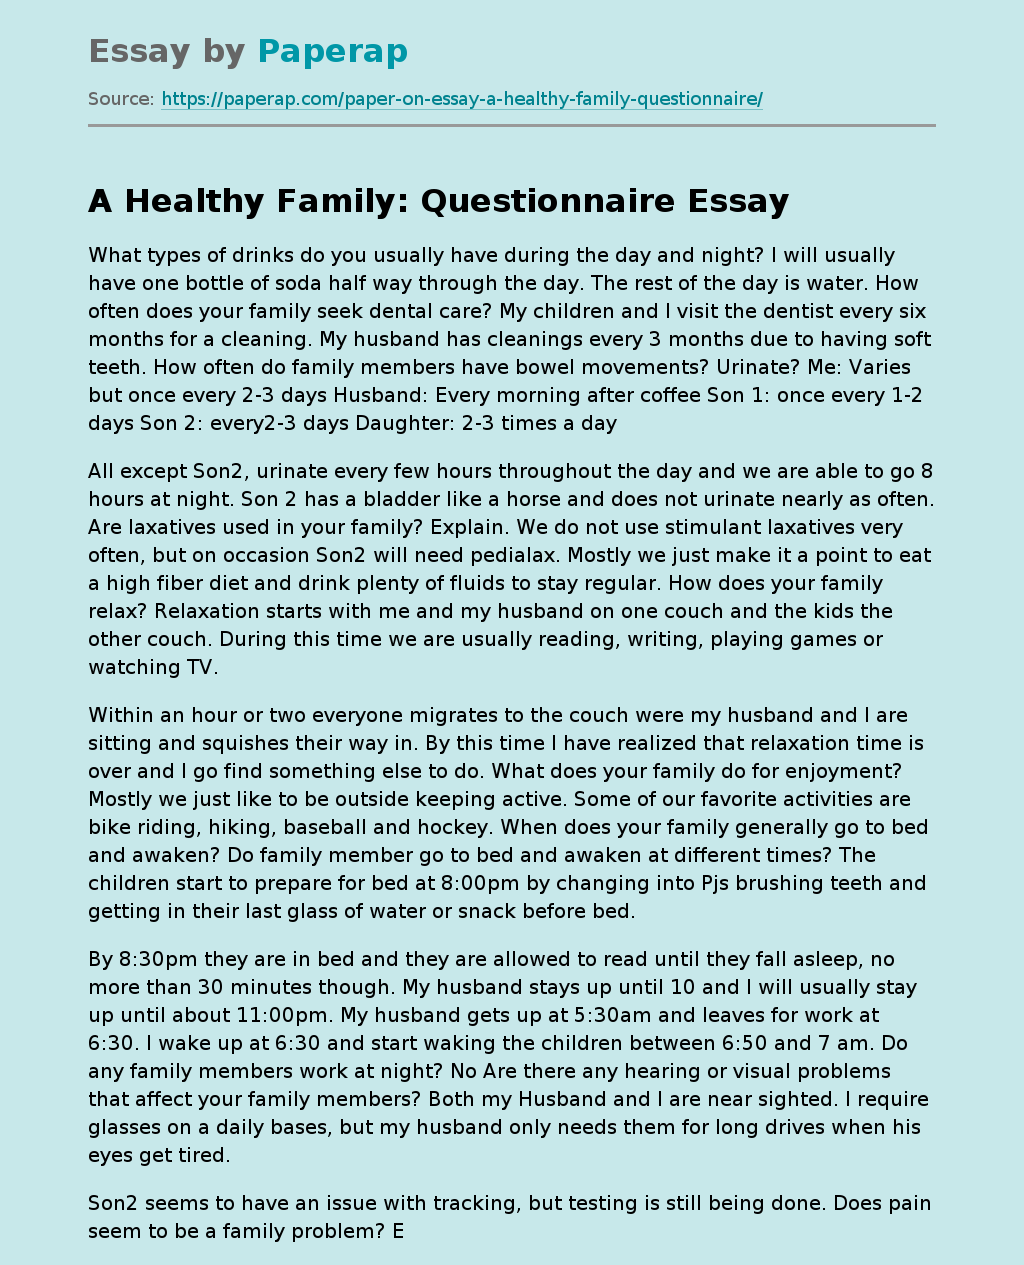 A Healthy Family: Questionnaire